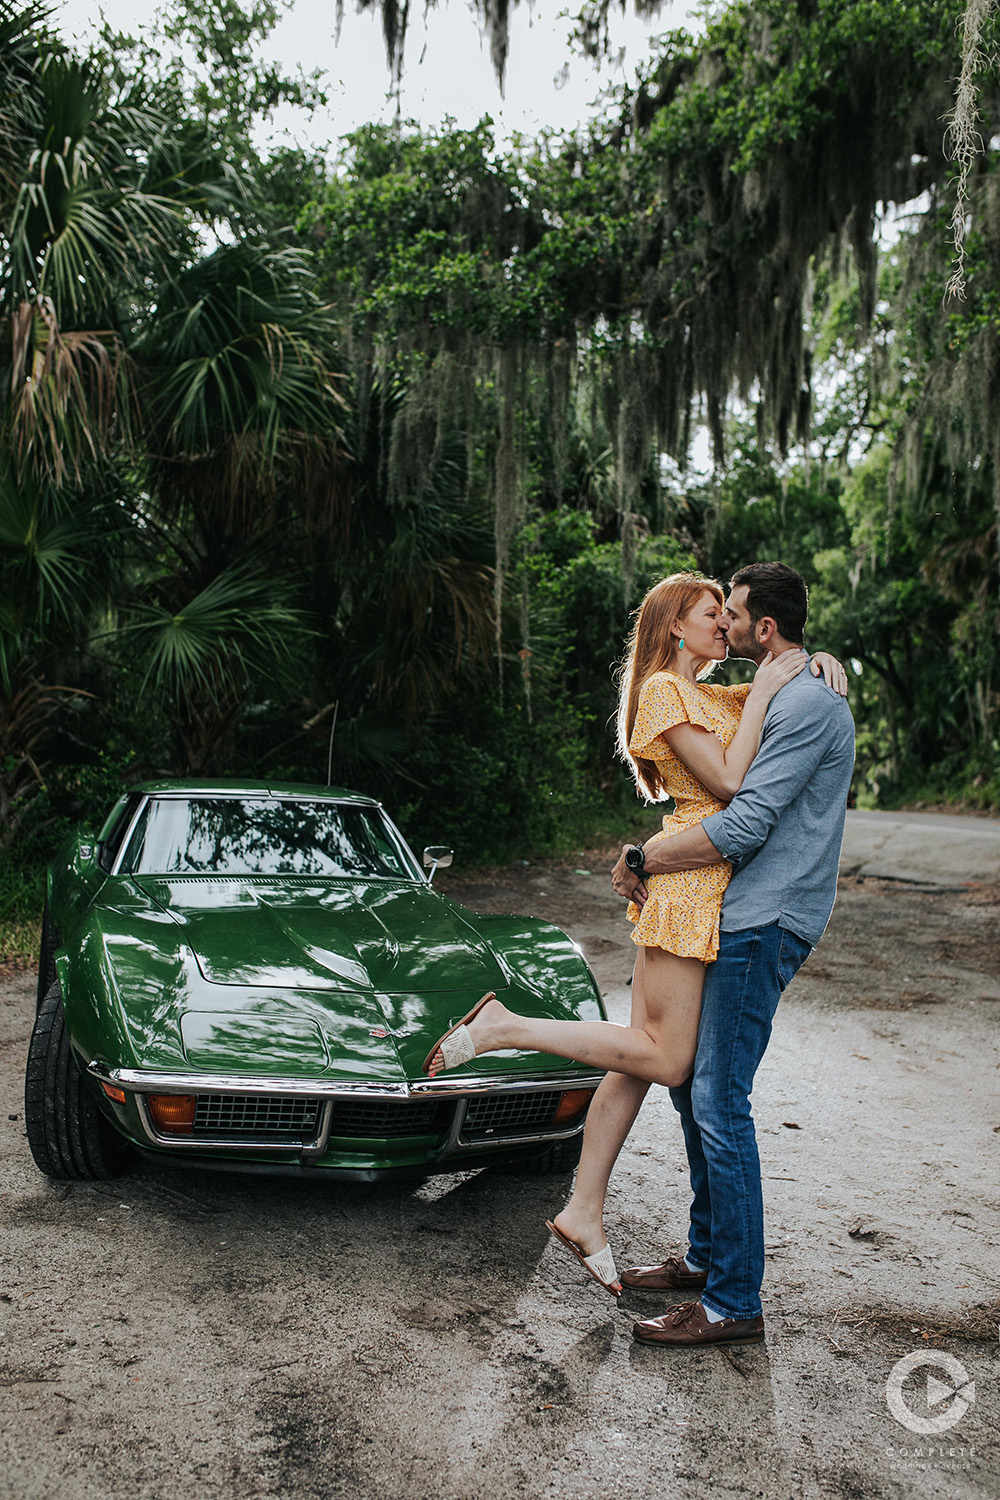 engaged couple kiss in front of green car